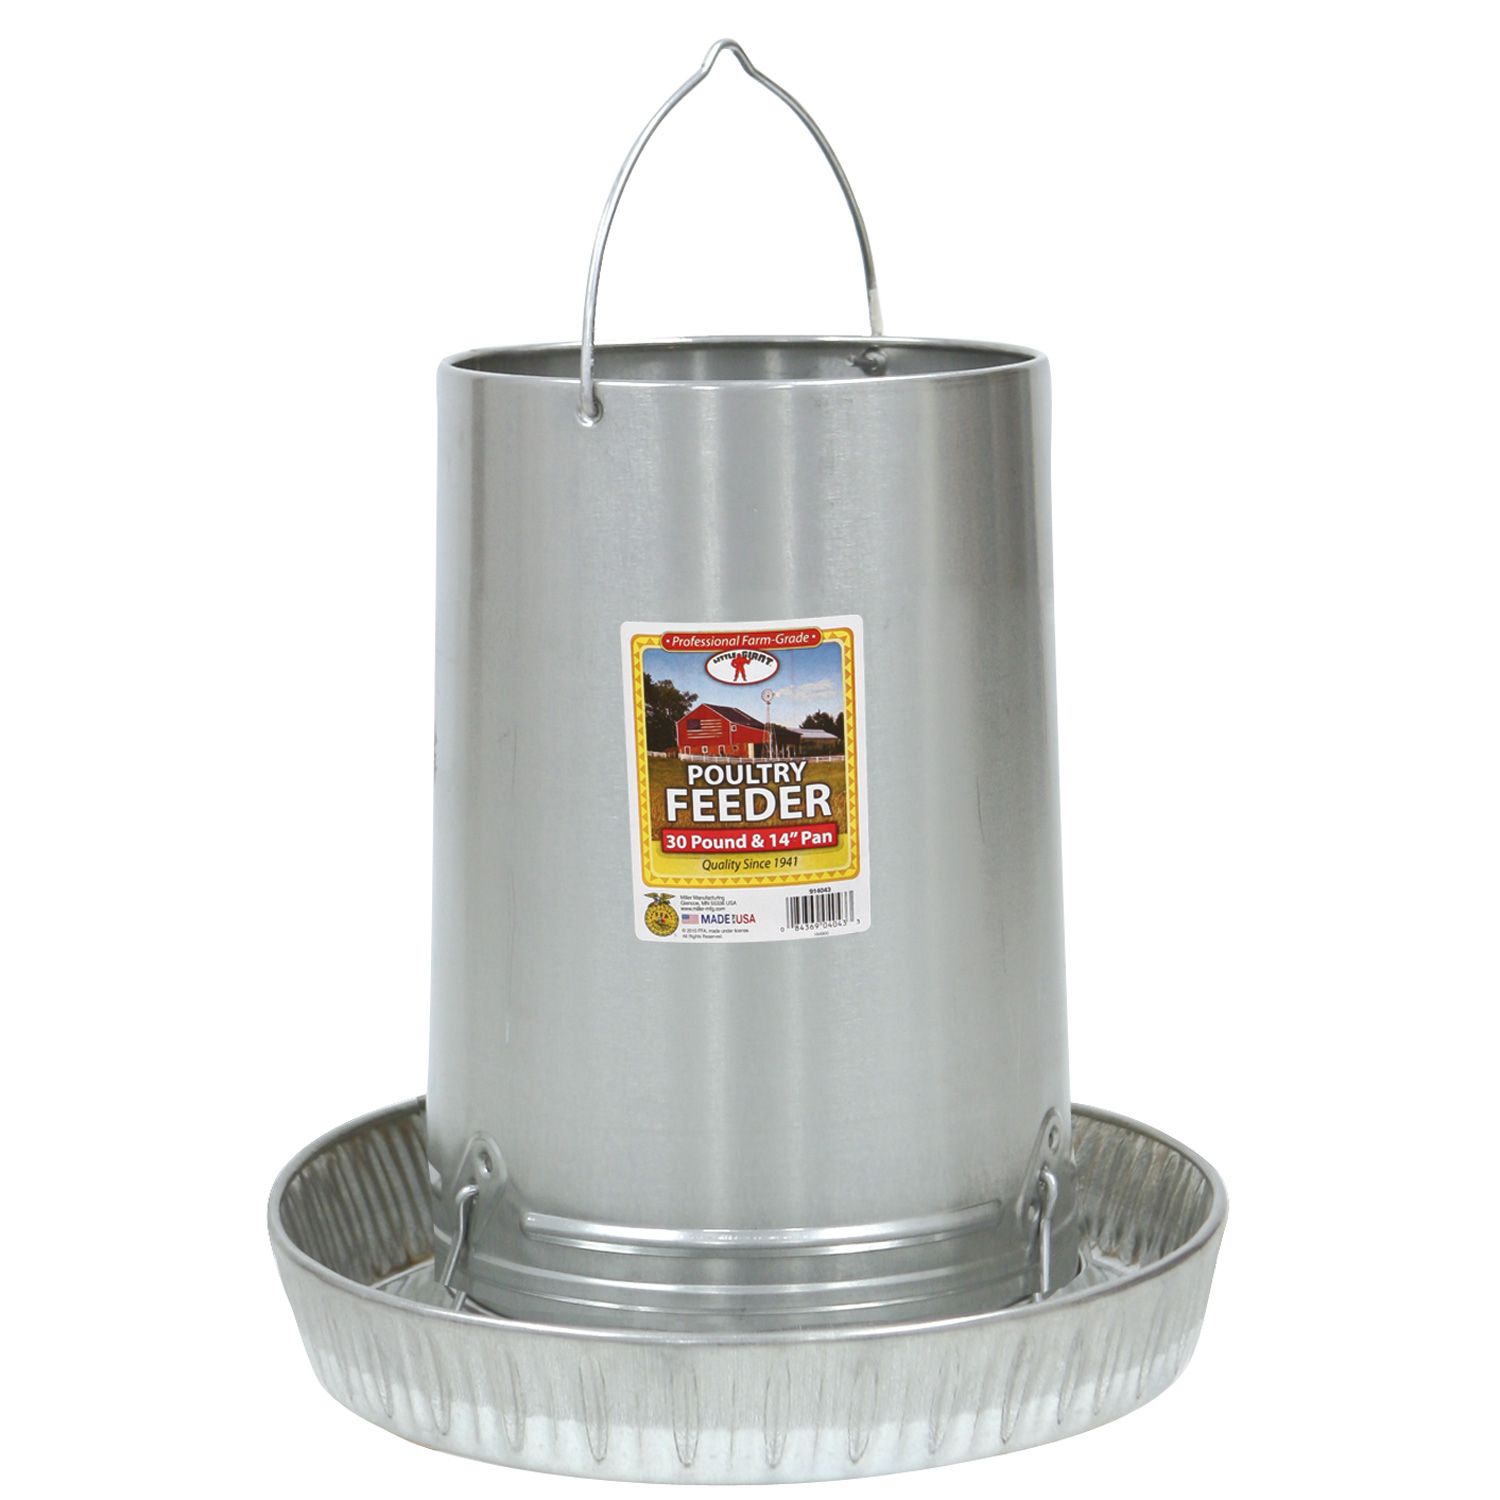 LITTLE GIANT Metal Poultry Feeder Tube with Hanging Handle 30-Pound 